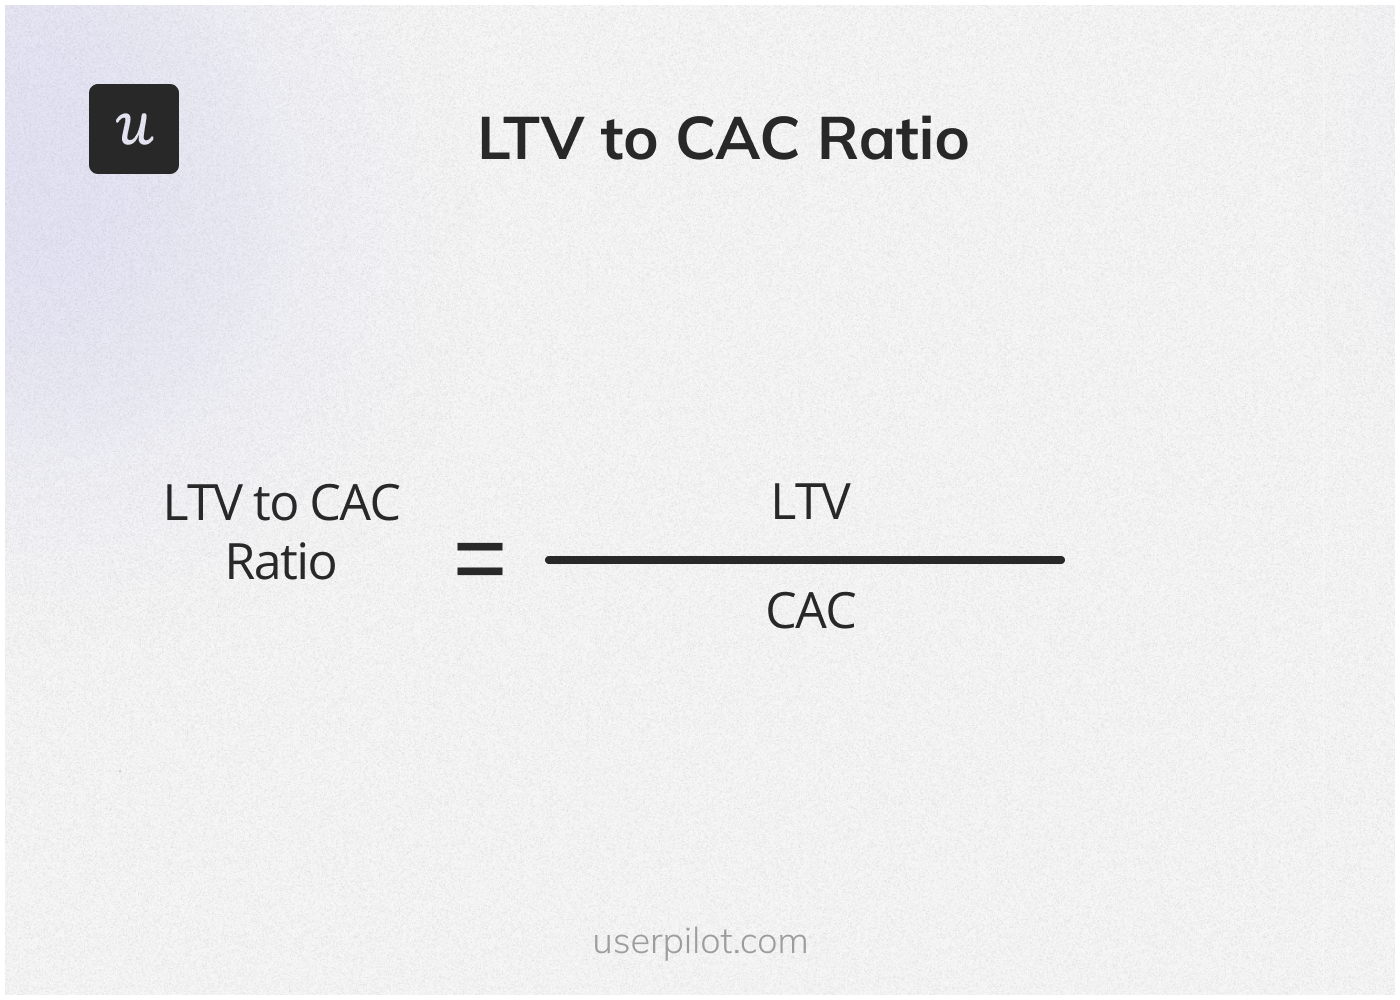 LTV to CAC ratio